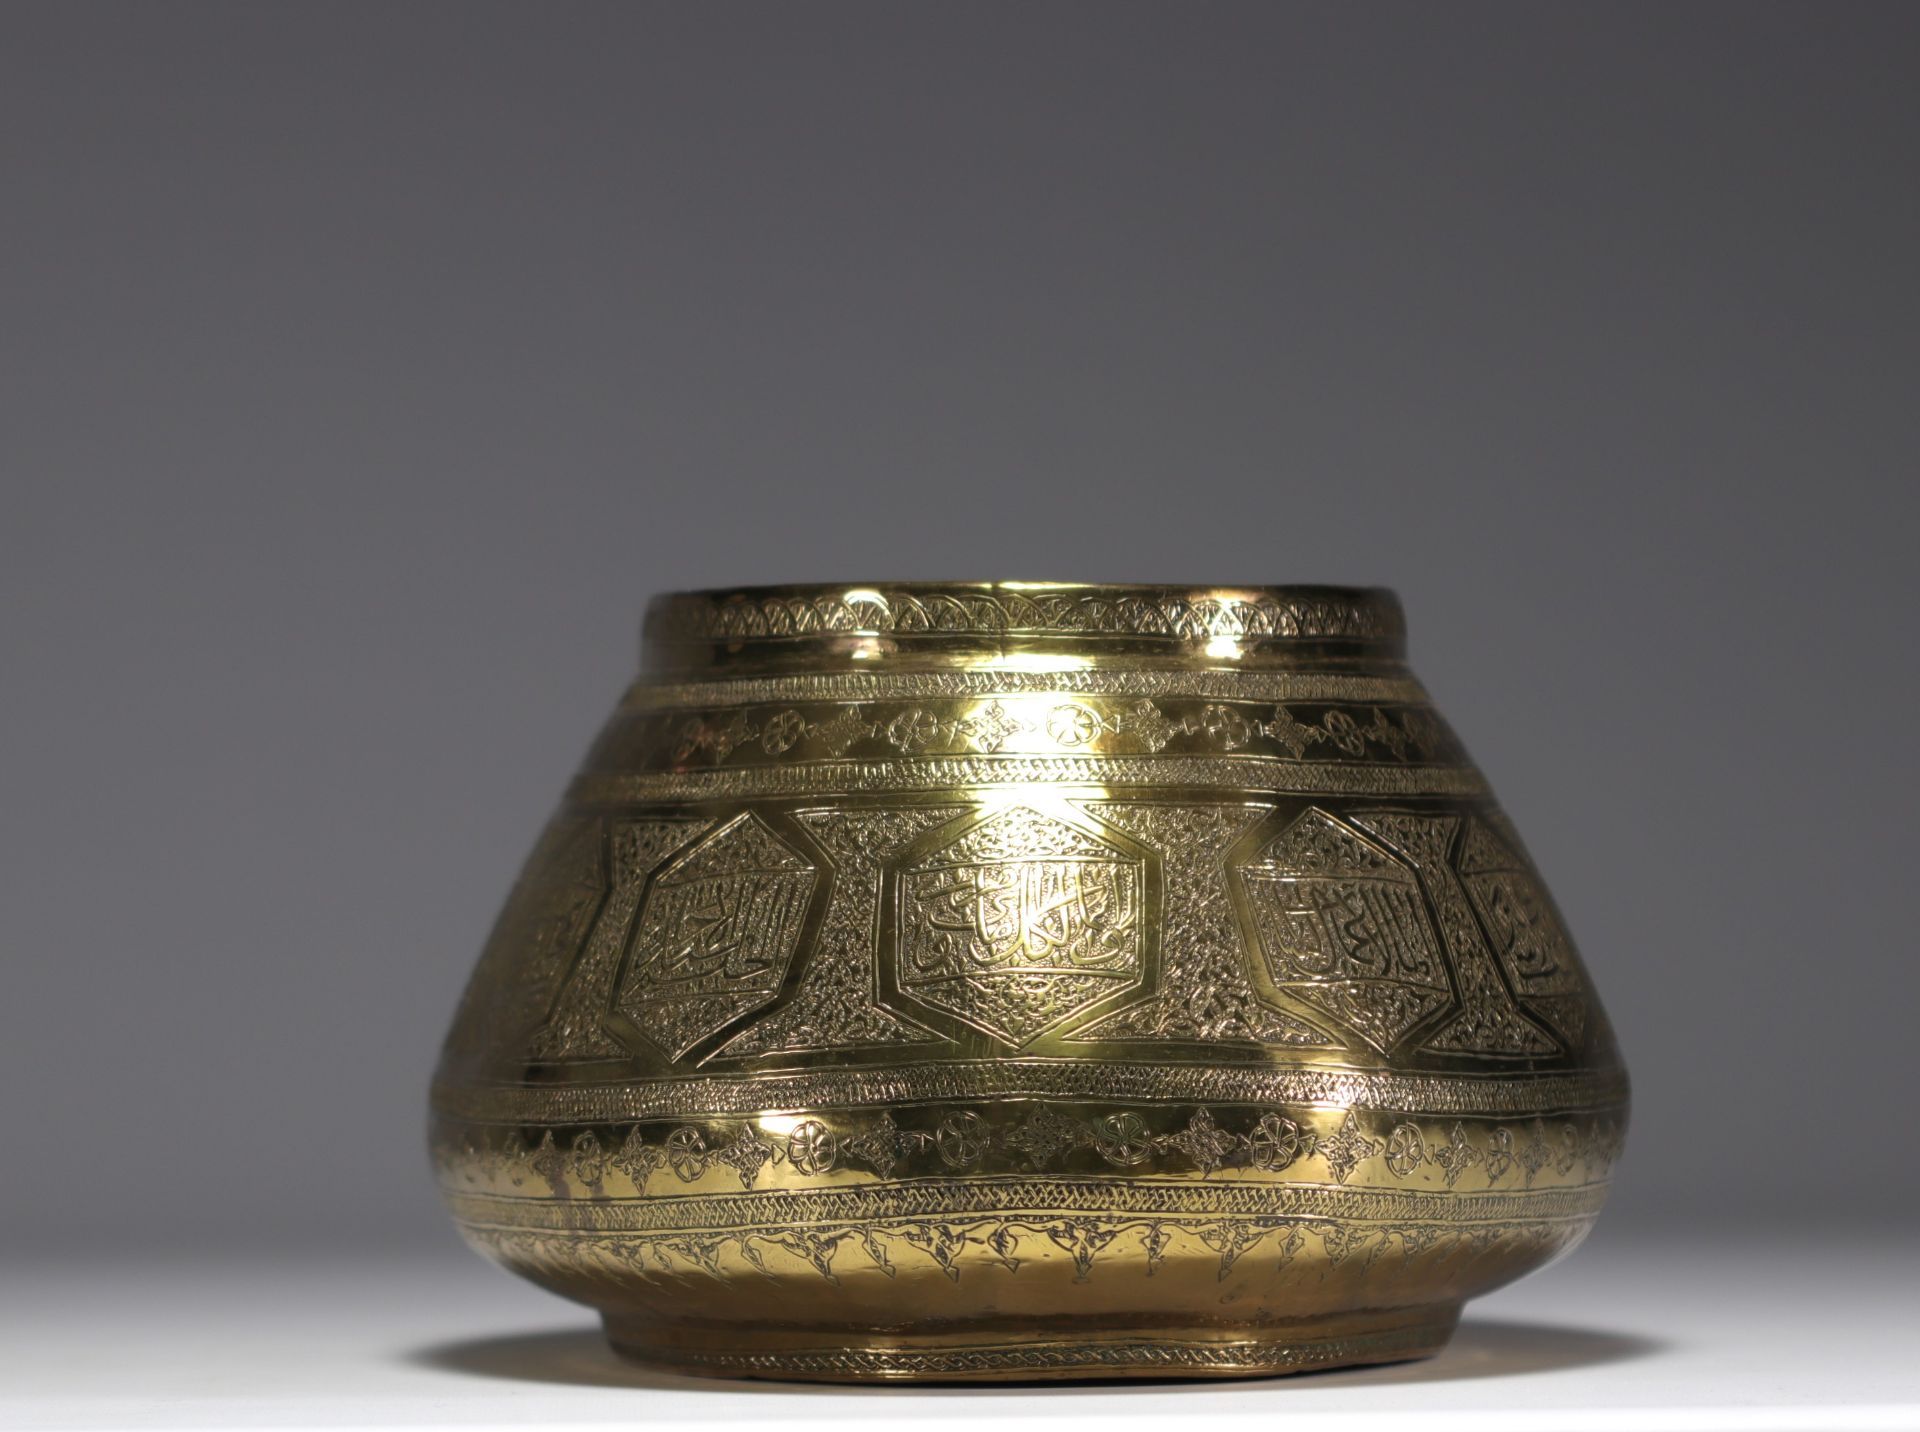 Iran - An old chased brass "Tas" basin decorated with flowers and wishes, 19th century. - Bild 2 aus 3